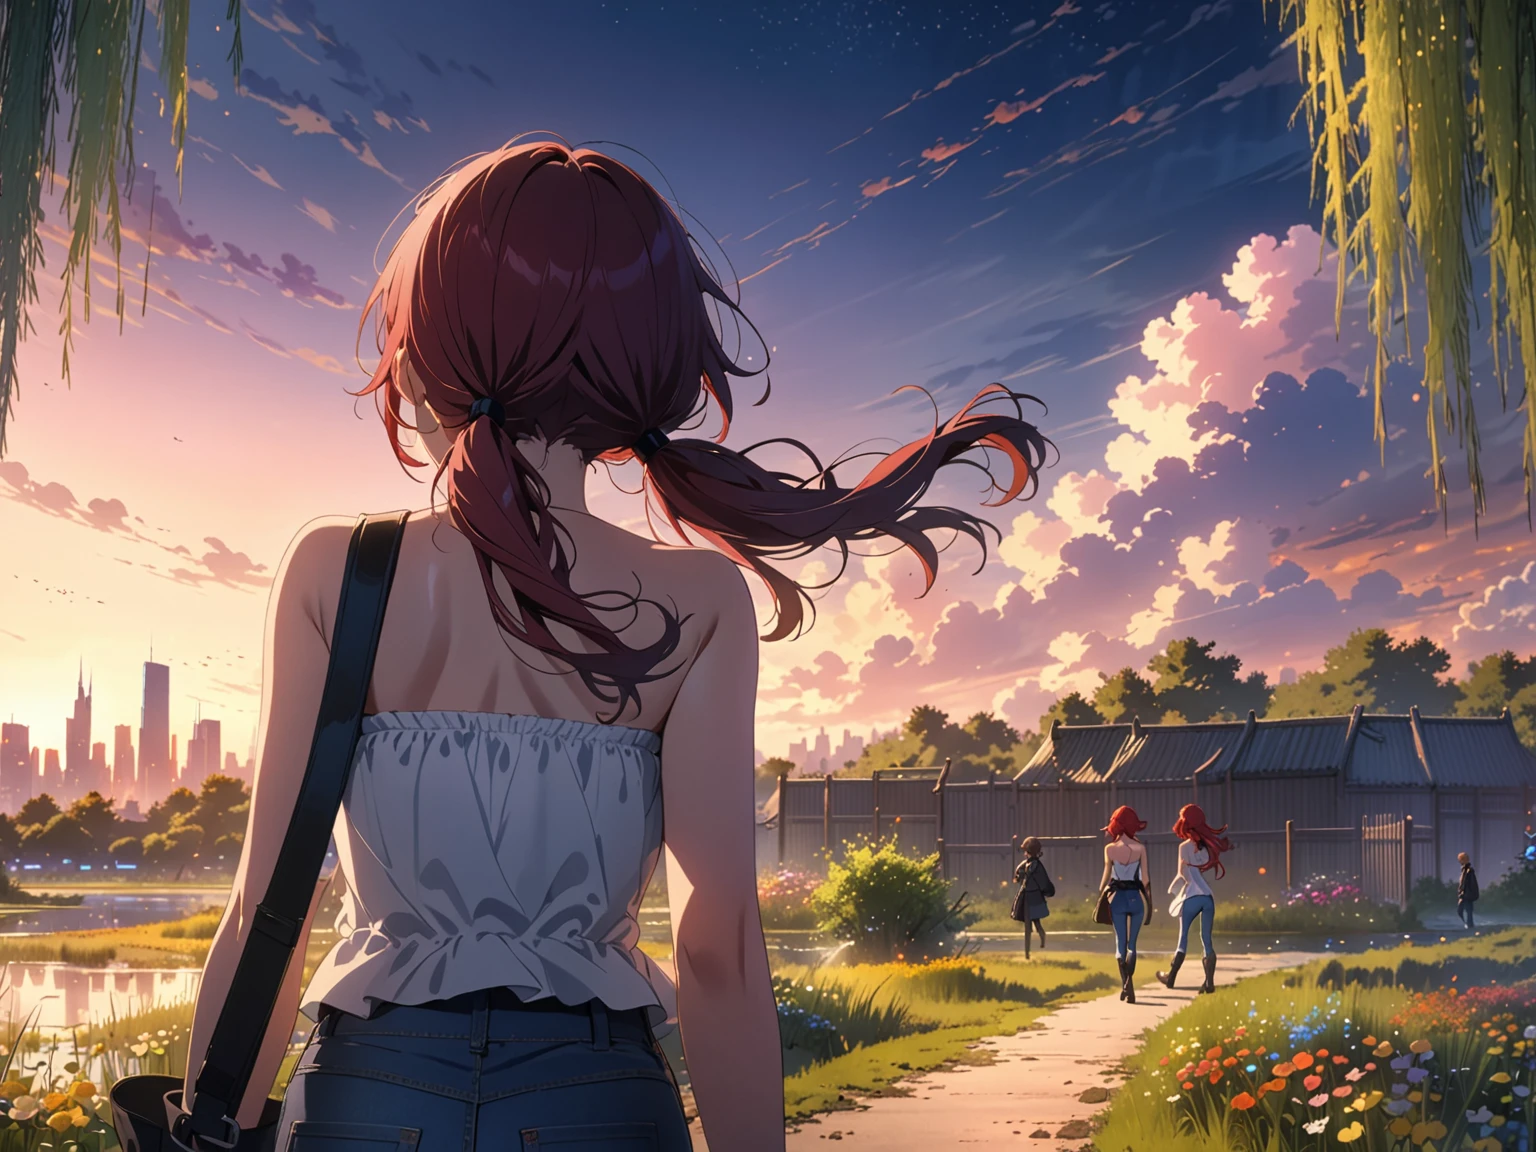 Highest Quality, masterpiece, light particles, stoic young woman walking home at dusk, from behind, red hair in low twin tails, swept bangs, windy, flowers, strapless white top, jeans, black boots, fence, willow trees, swamp, dusk, colorful flowers, clouds, distant city, people in background, anime